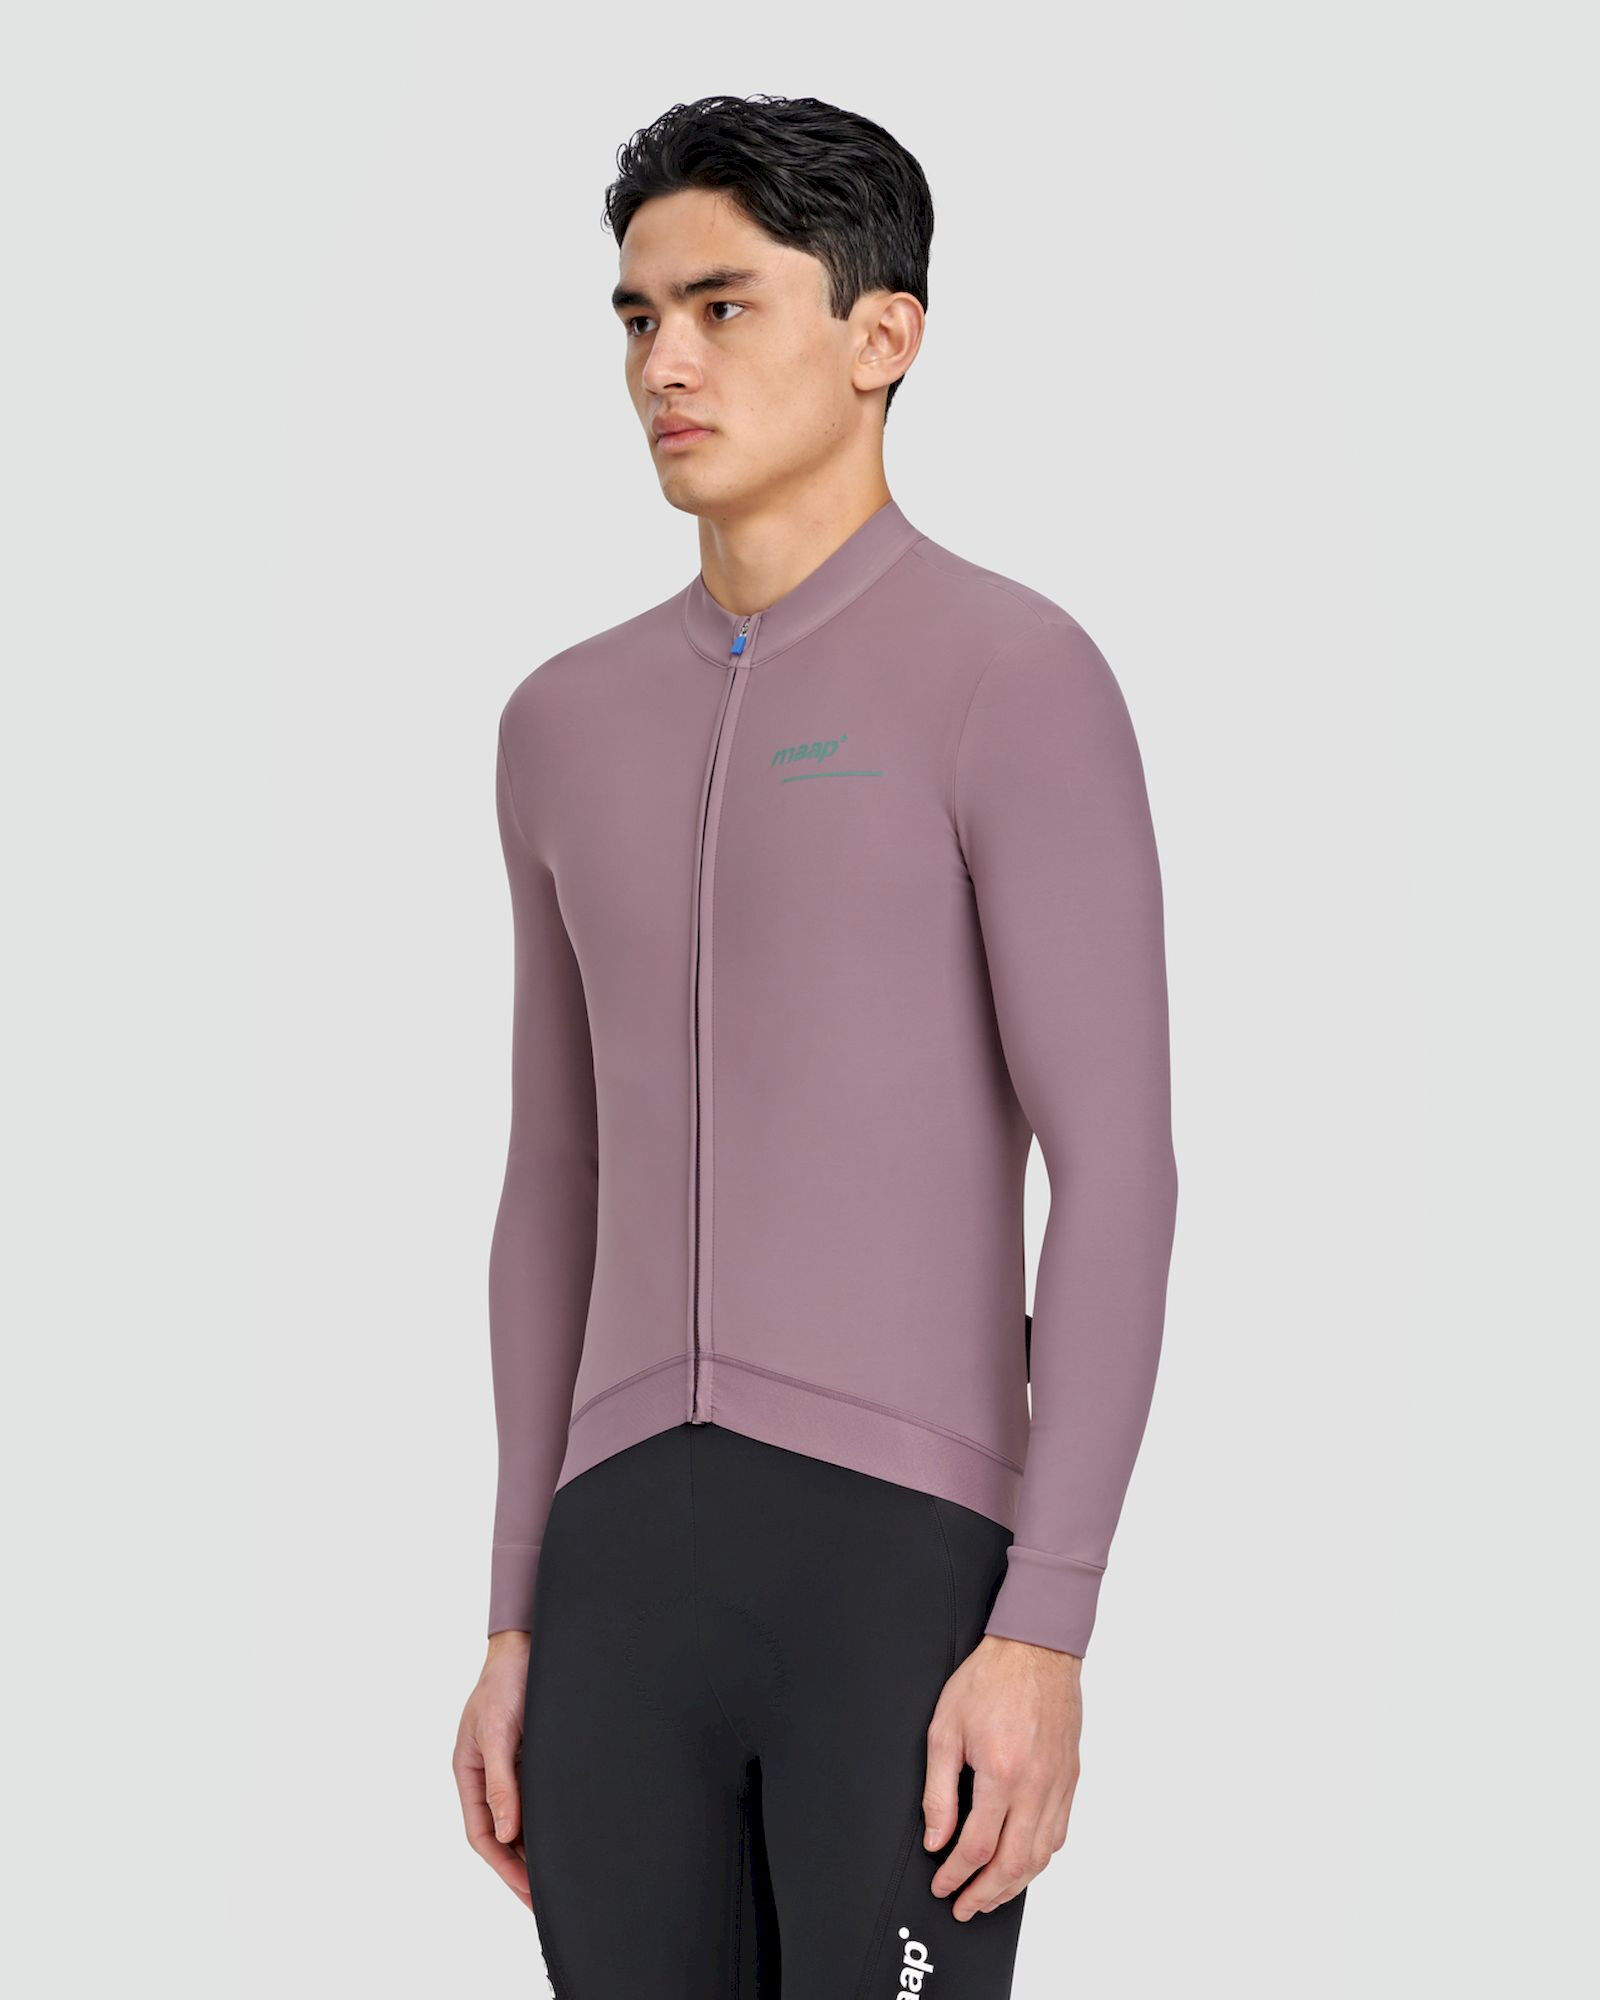 Maap Training Thermal LS Jersey - Cycling jersey - Men's | Hardloop